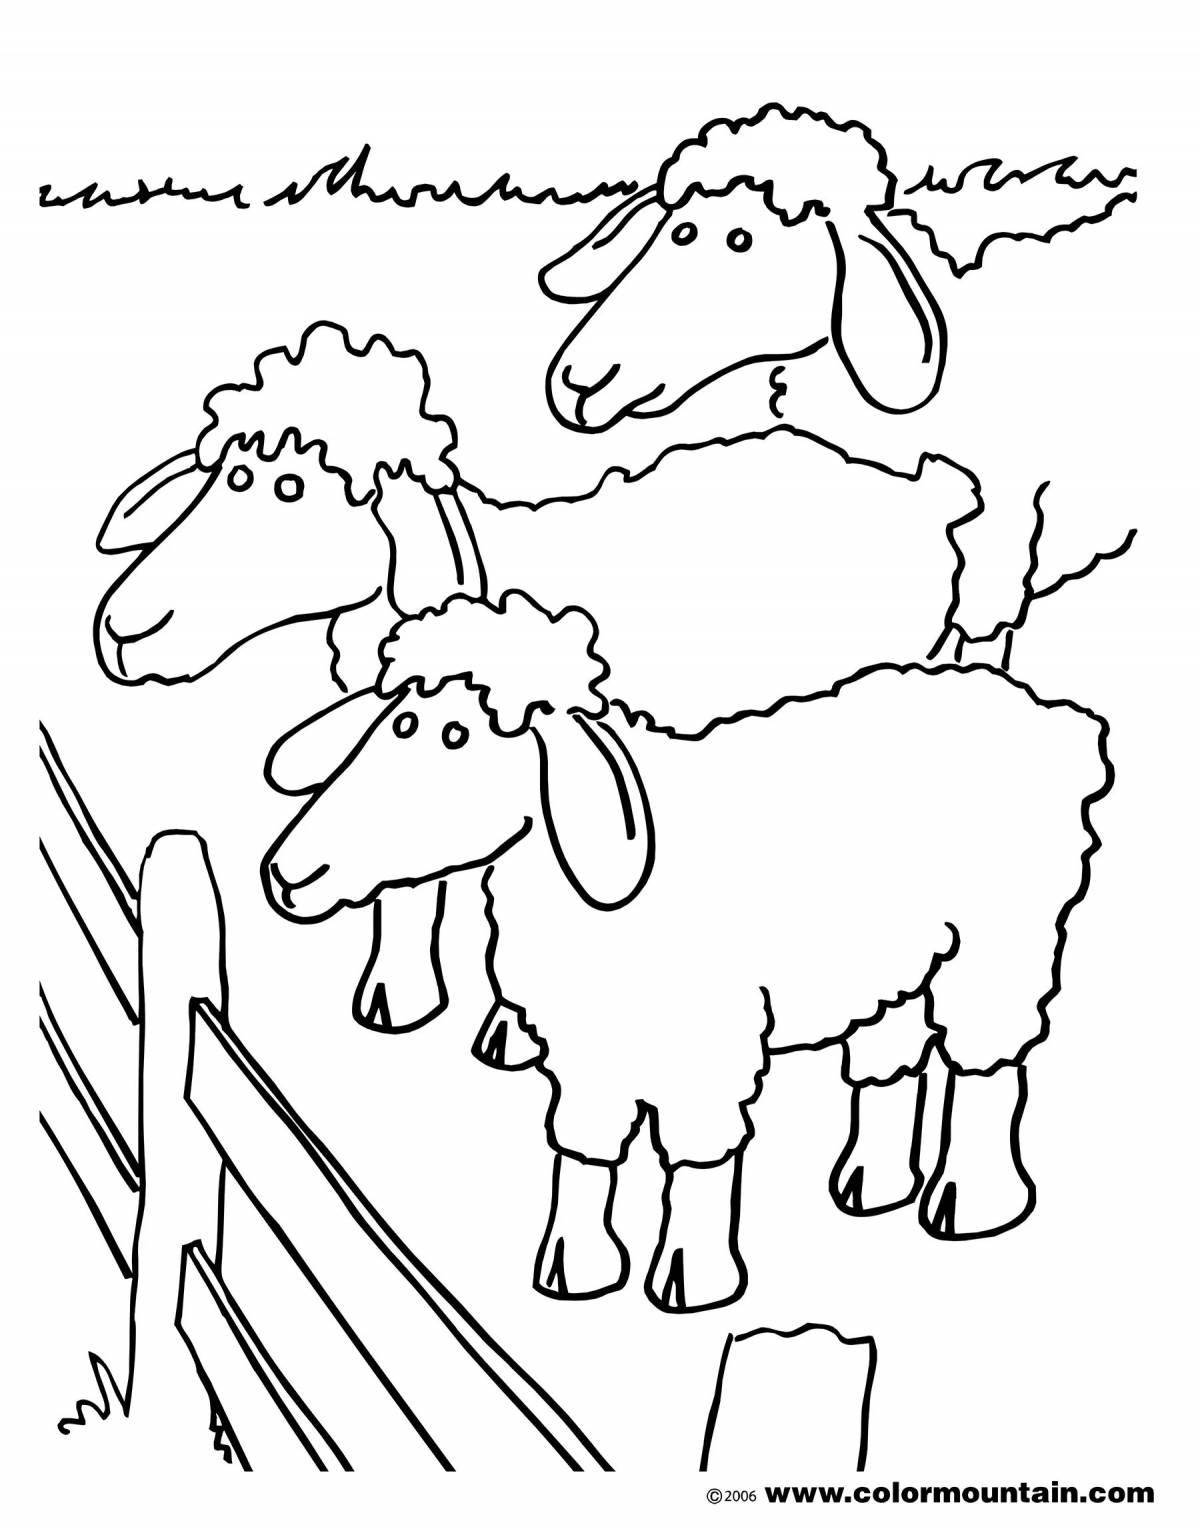 Fabulous lamb and wolf coloring page